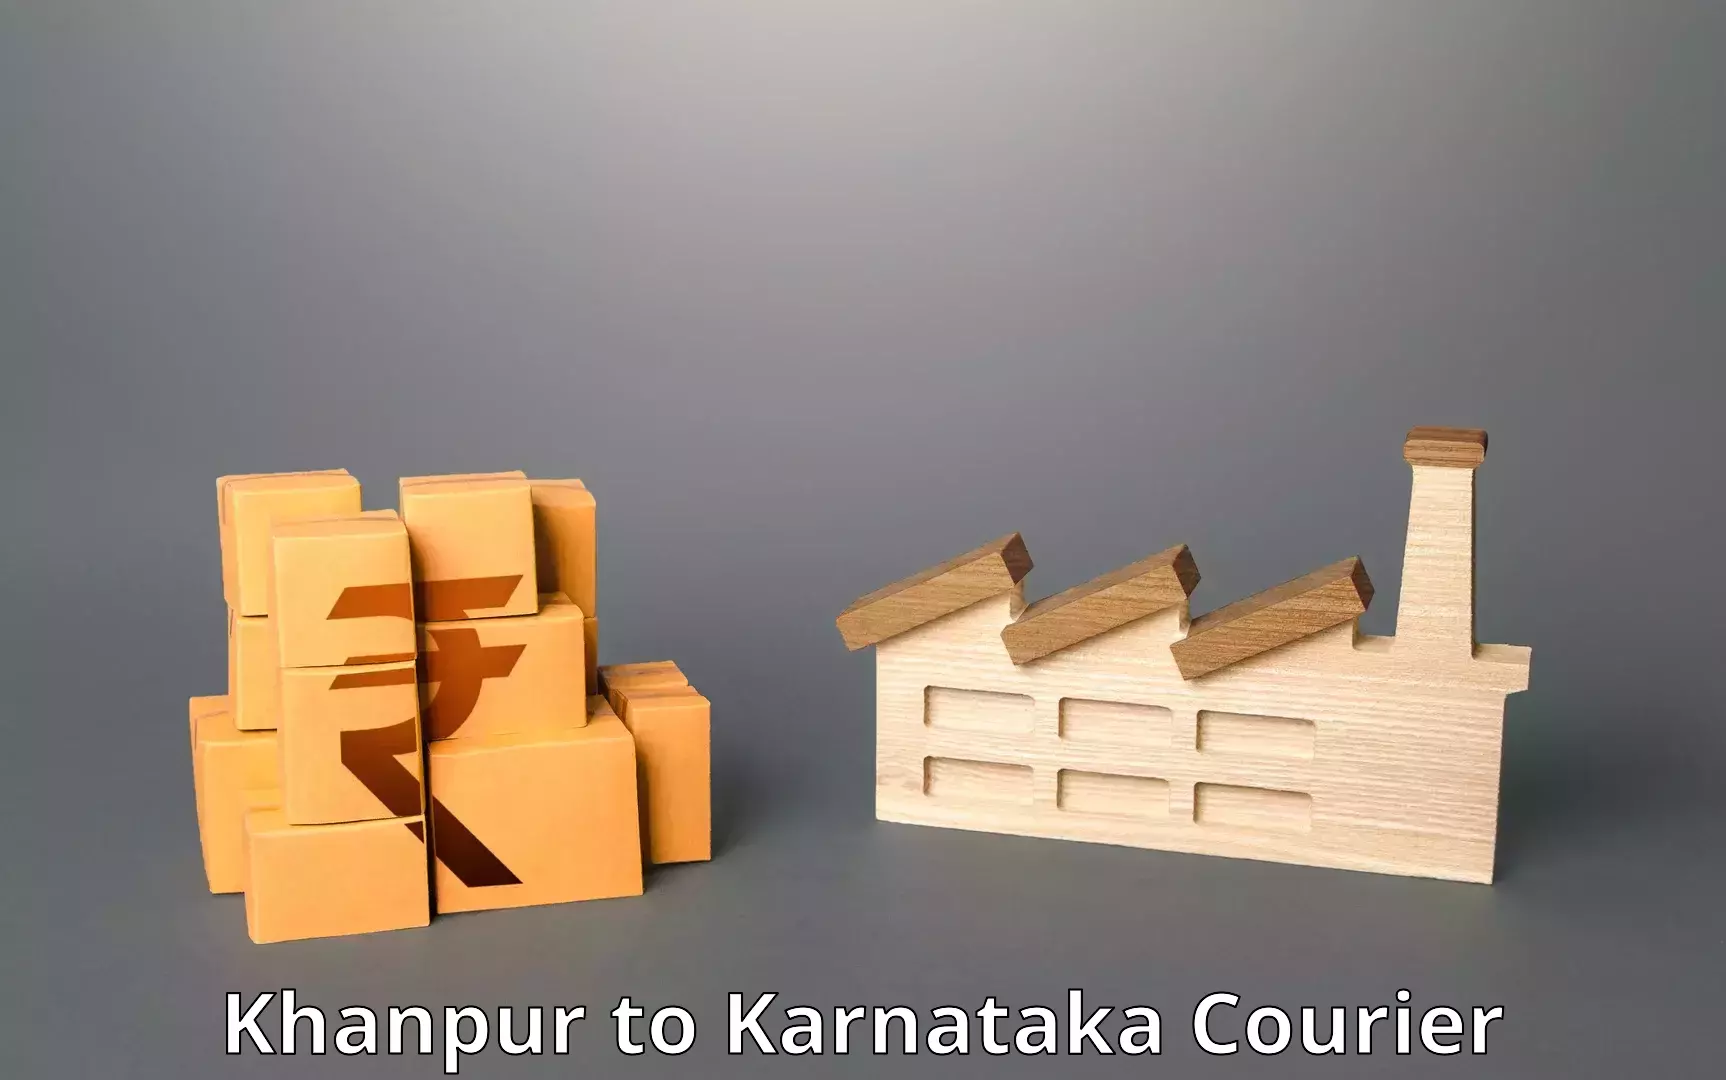 24-hour courier service Khanpur to Mangalore Port